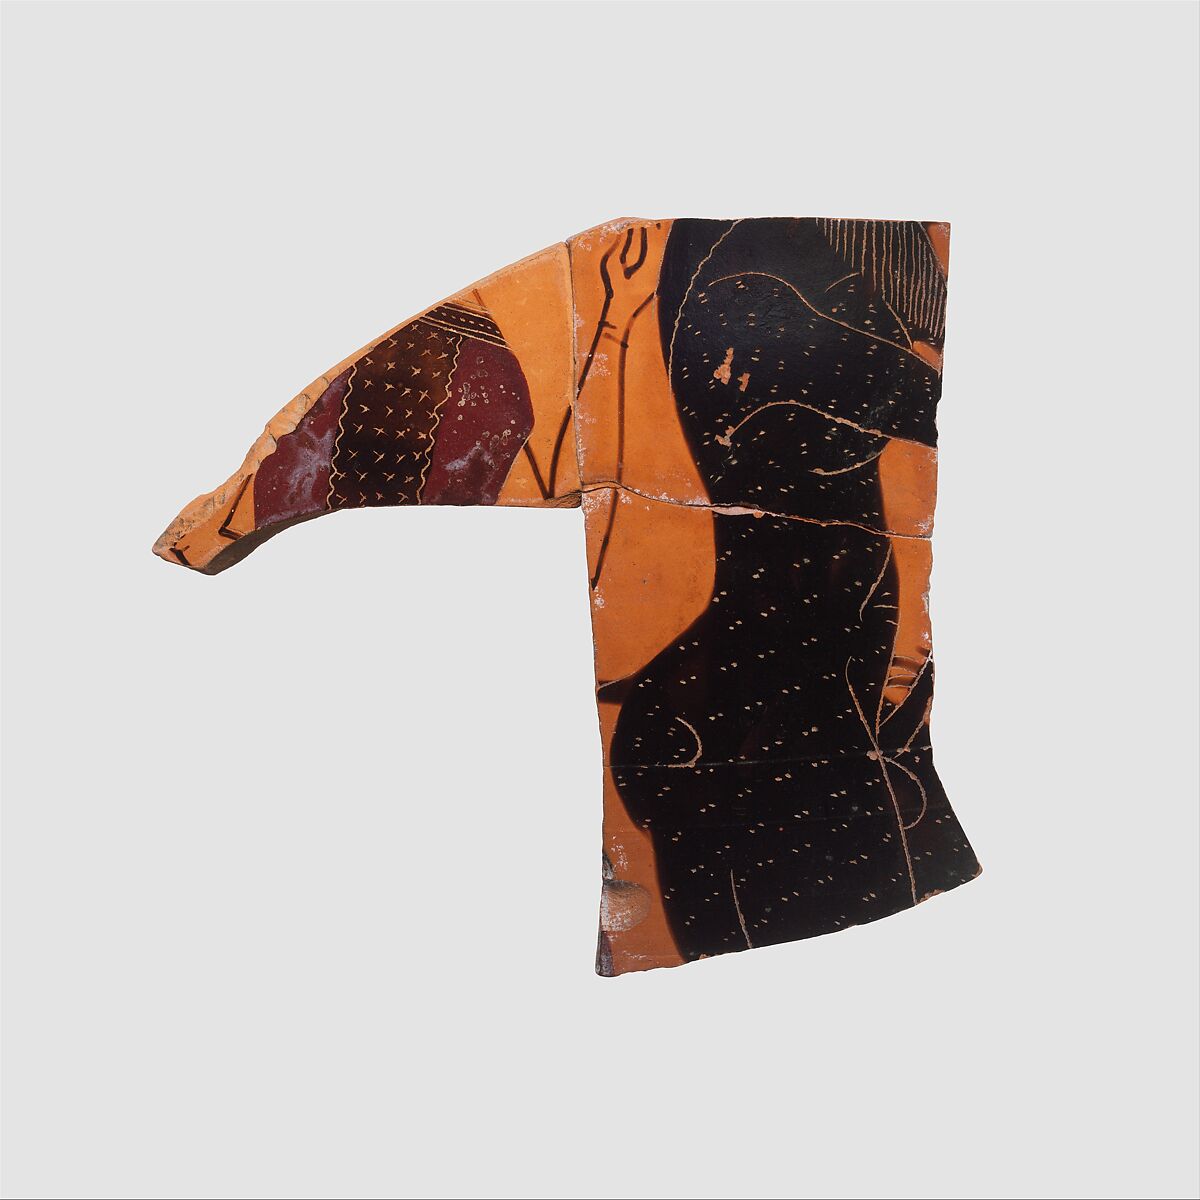 Fragments of a terracotta amphora (jar), Attributed to the Amasis Painter, Terracotta, Greek, Attic 